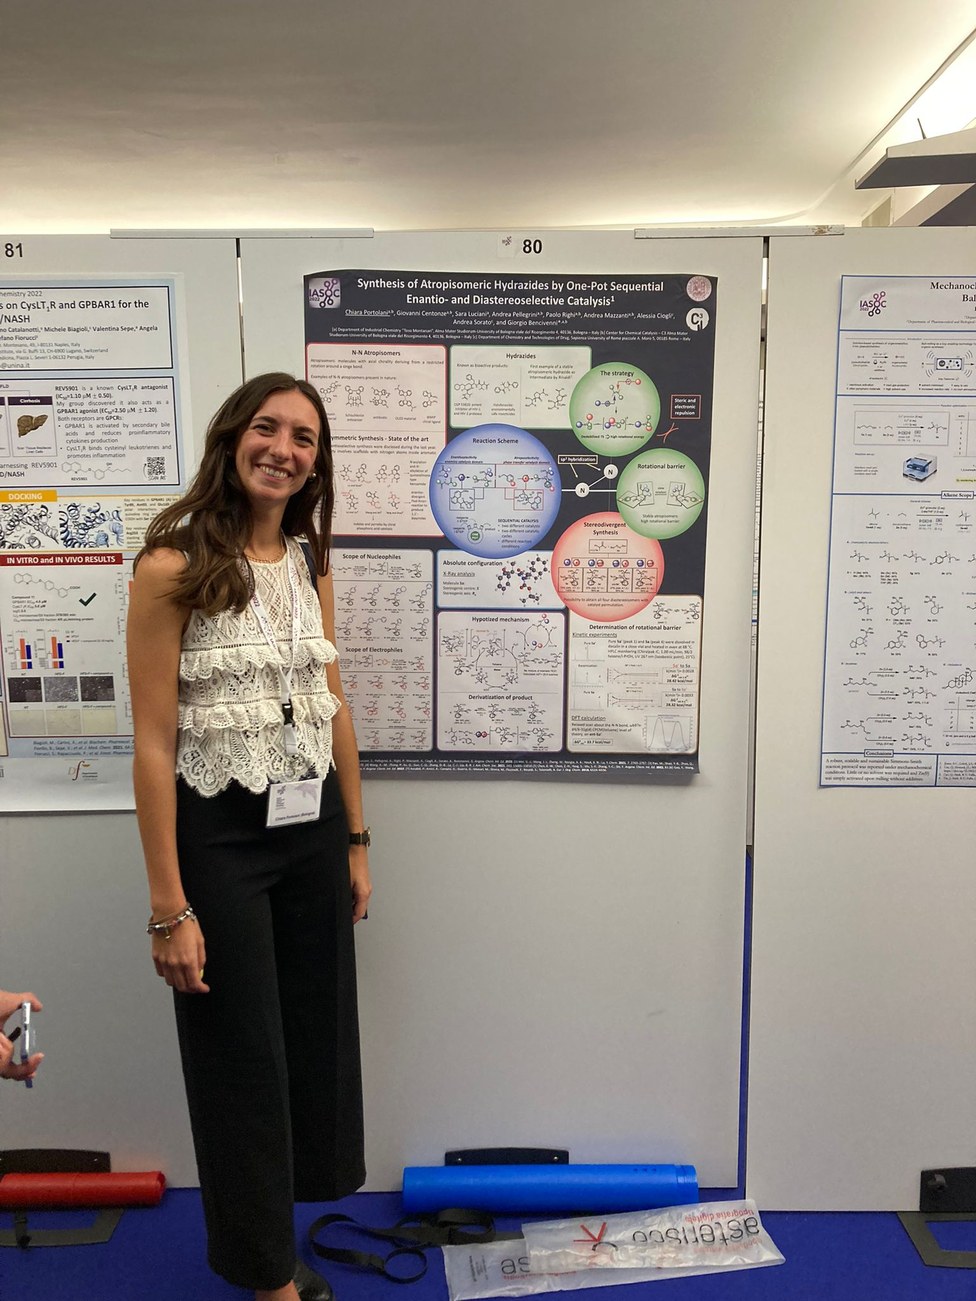 Chiara during the poster session at ISOC